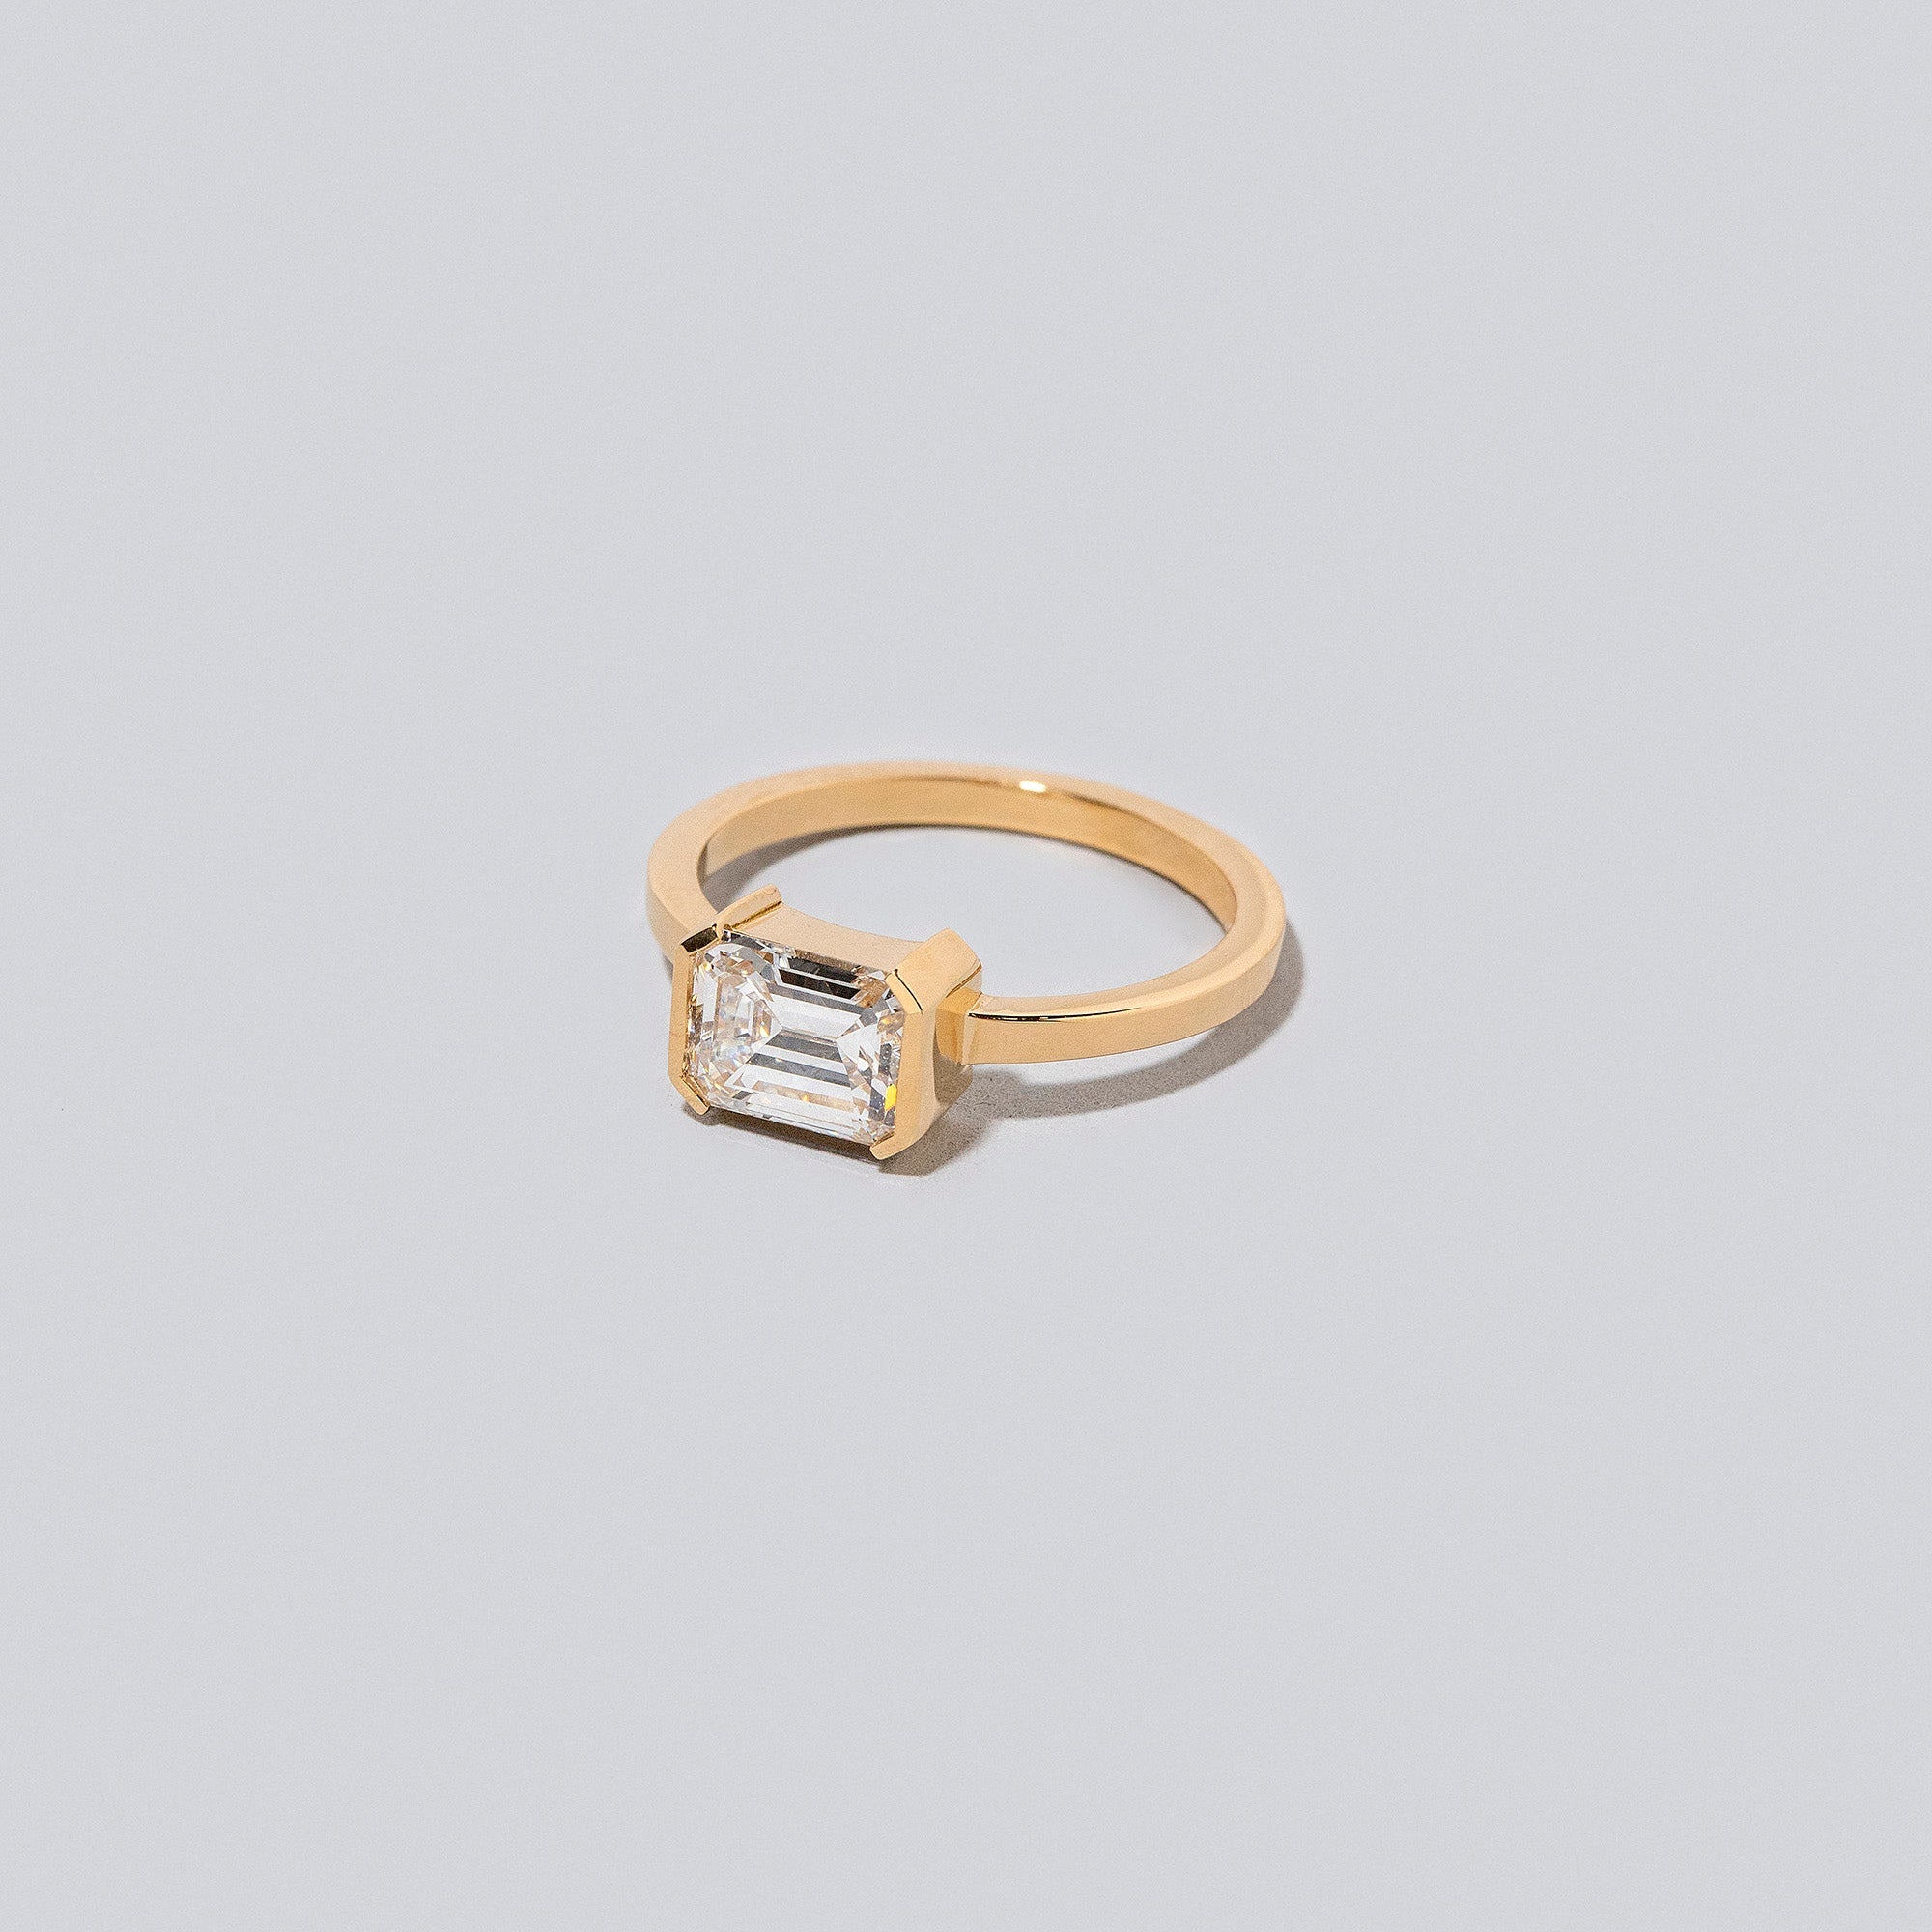 product_details::Manor Ring on light colored background.